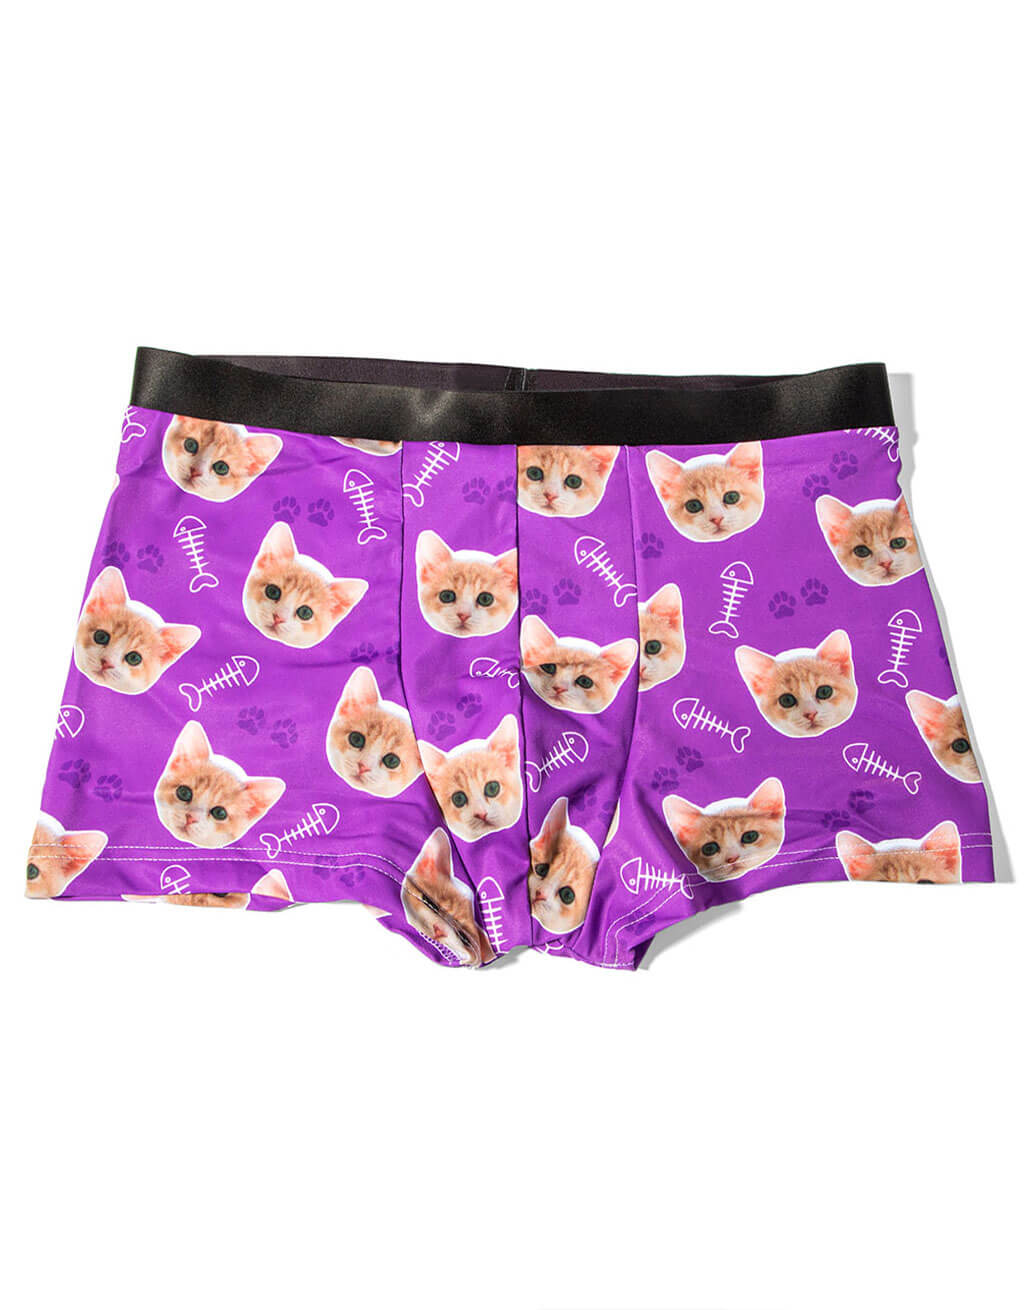 Your Cat on Boxers  Personalised Cat Boxer Shorts – Super Socks